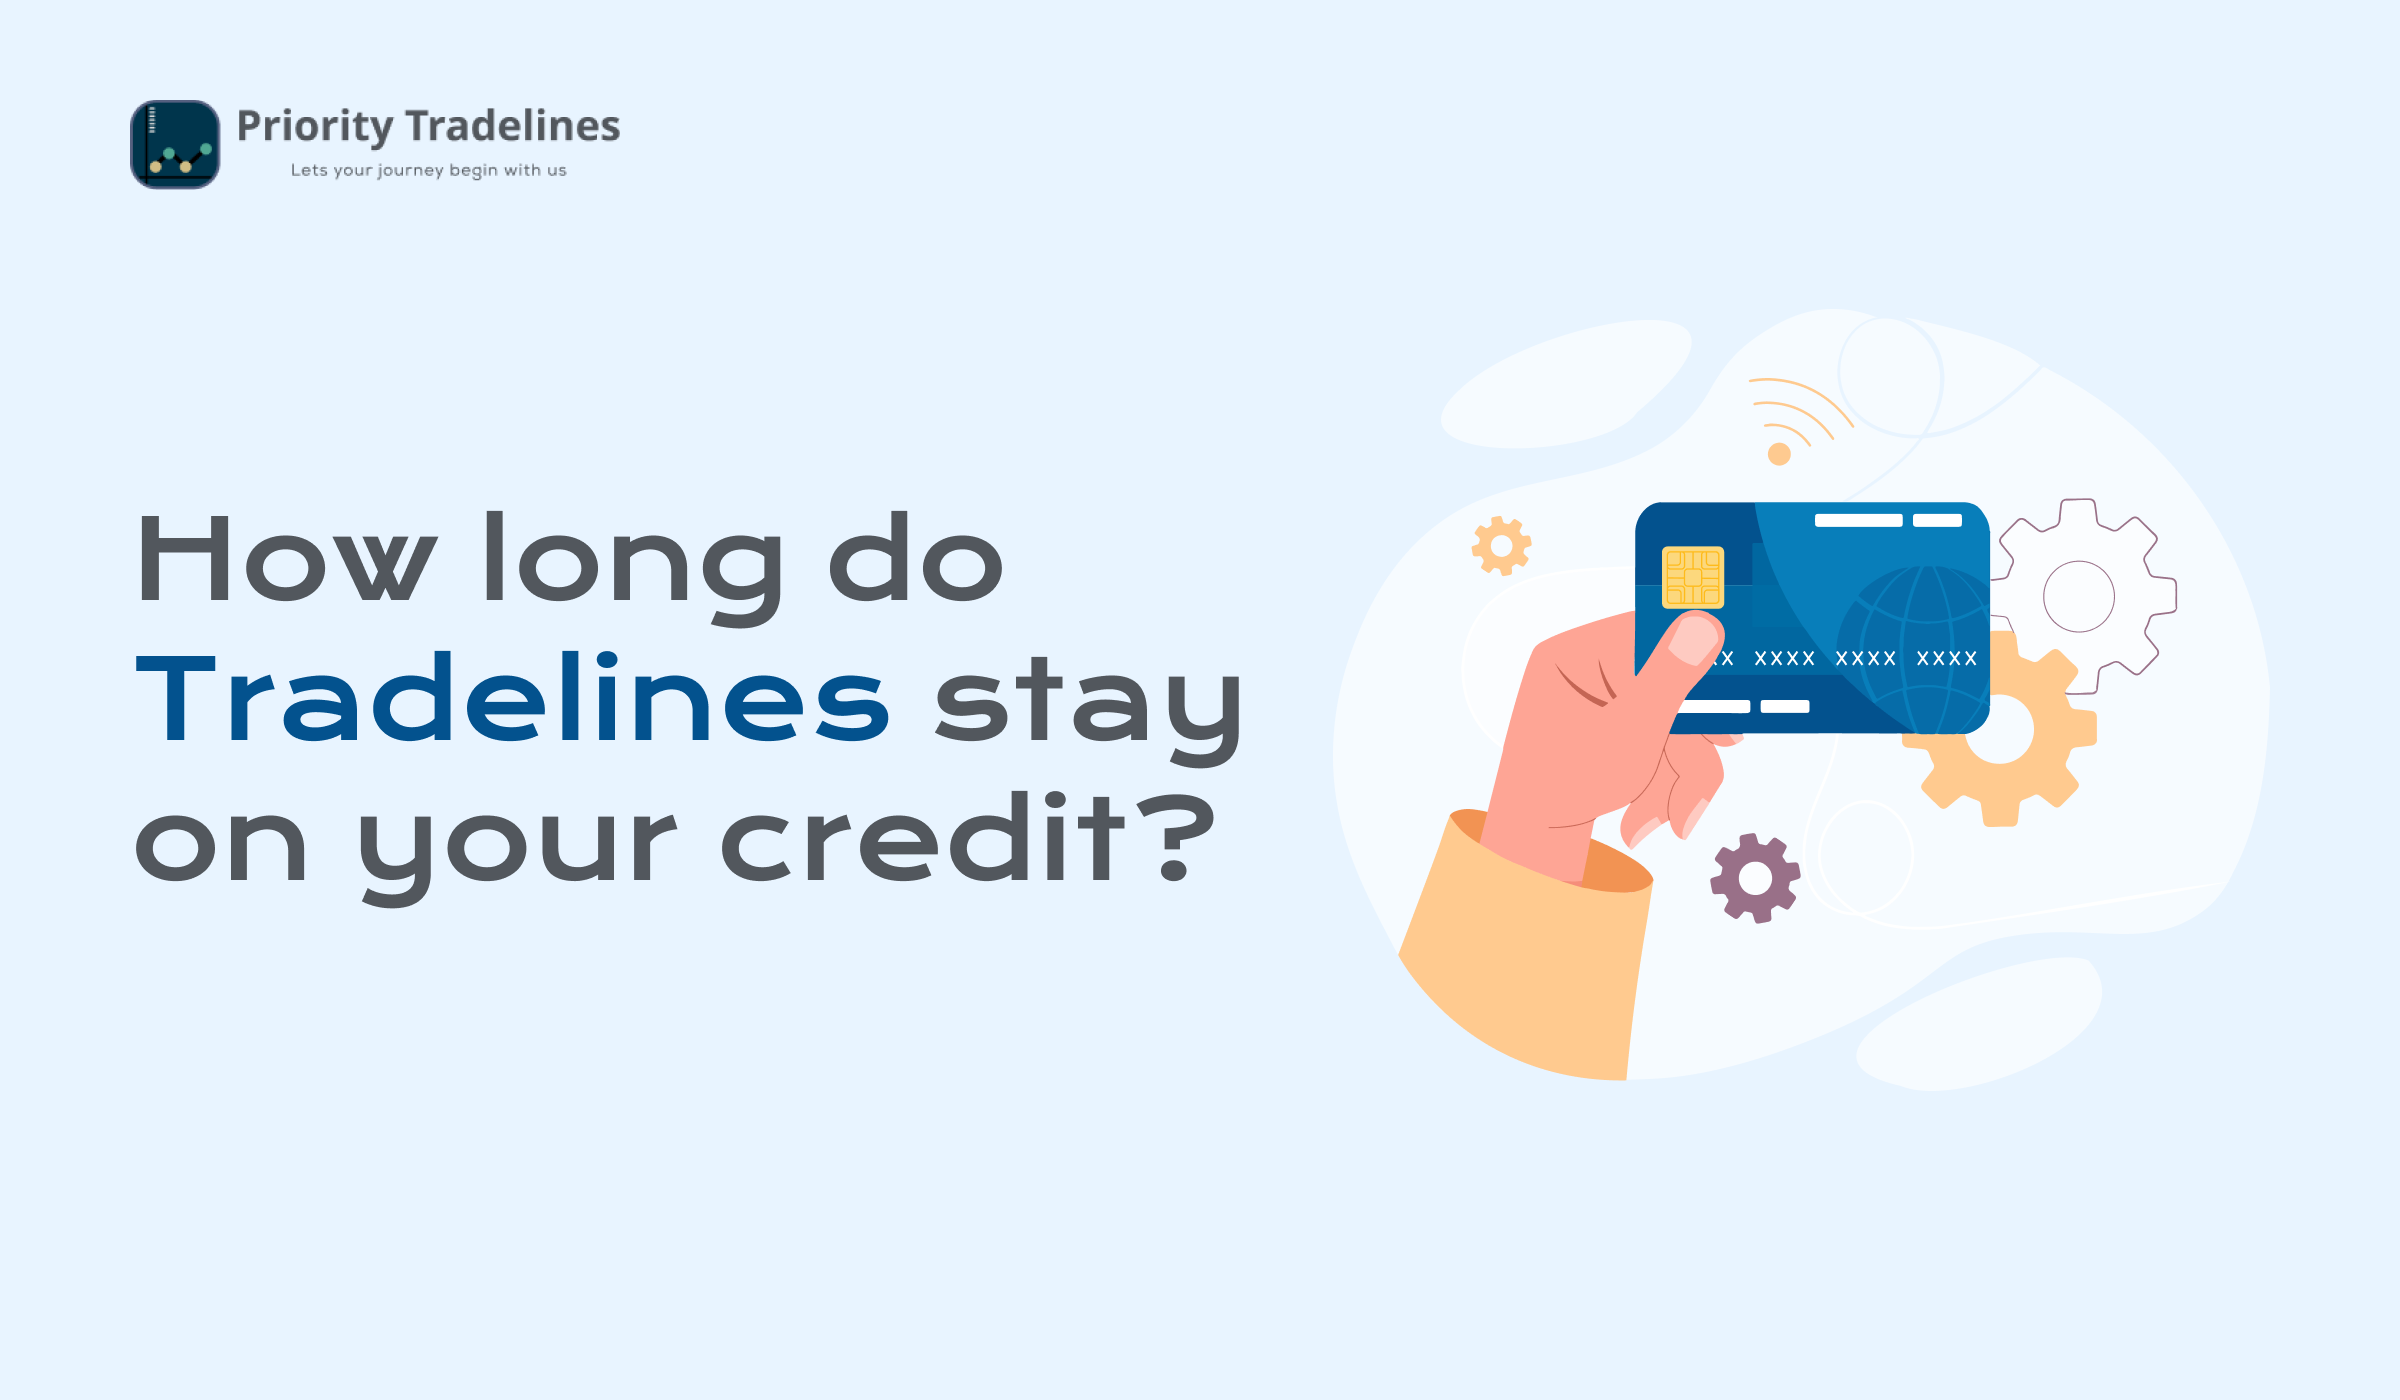 How long do tradelines stay on your credit?